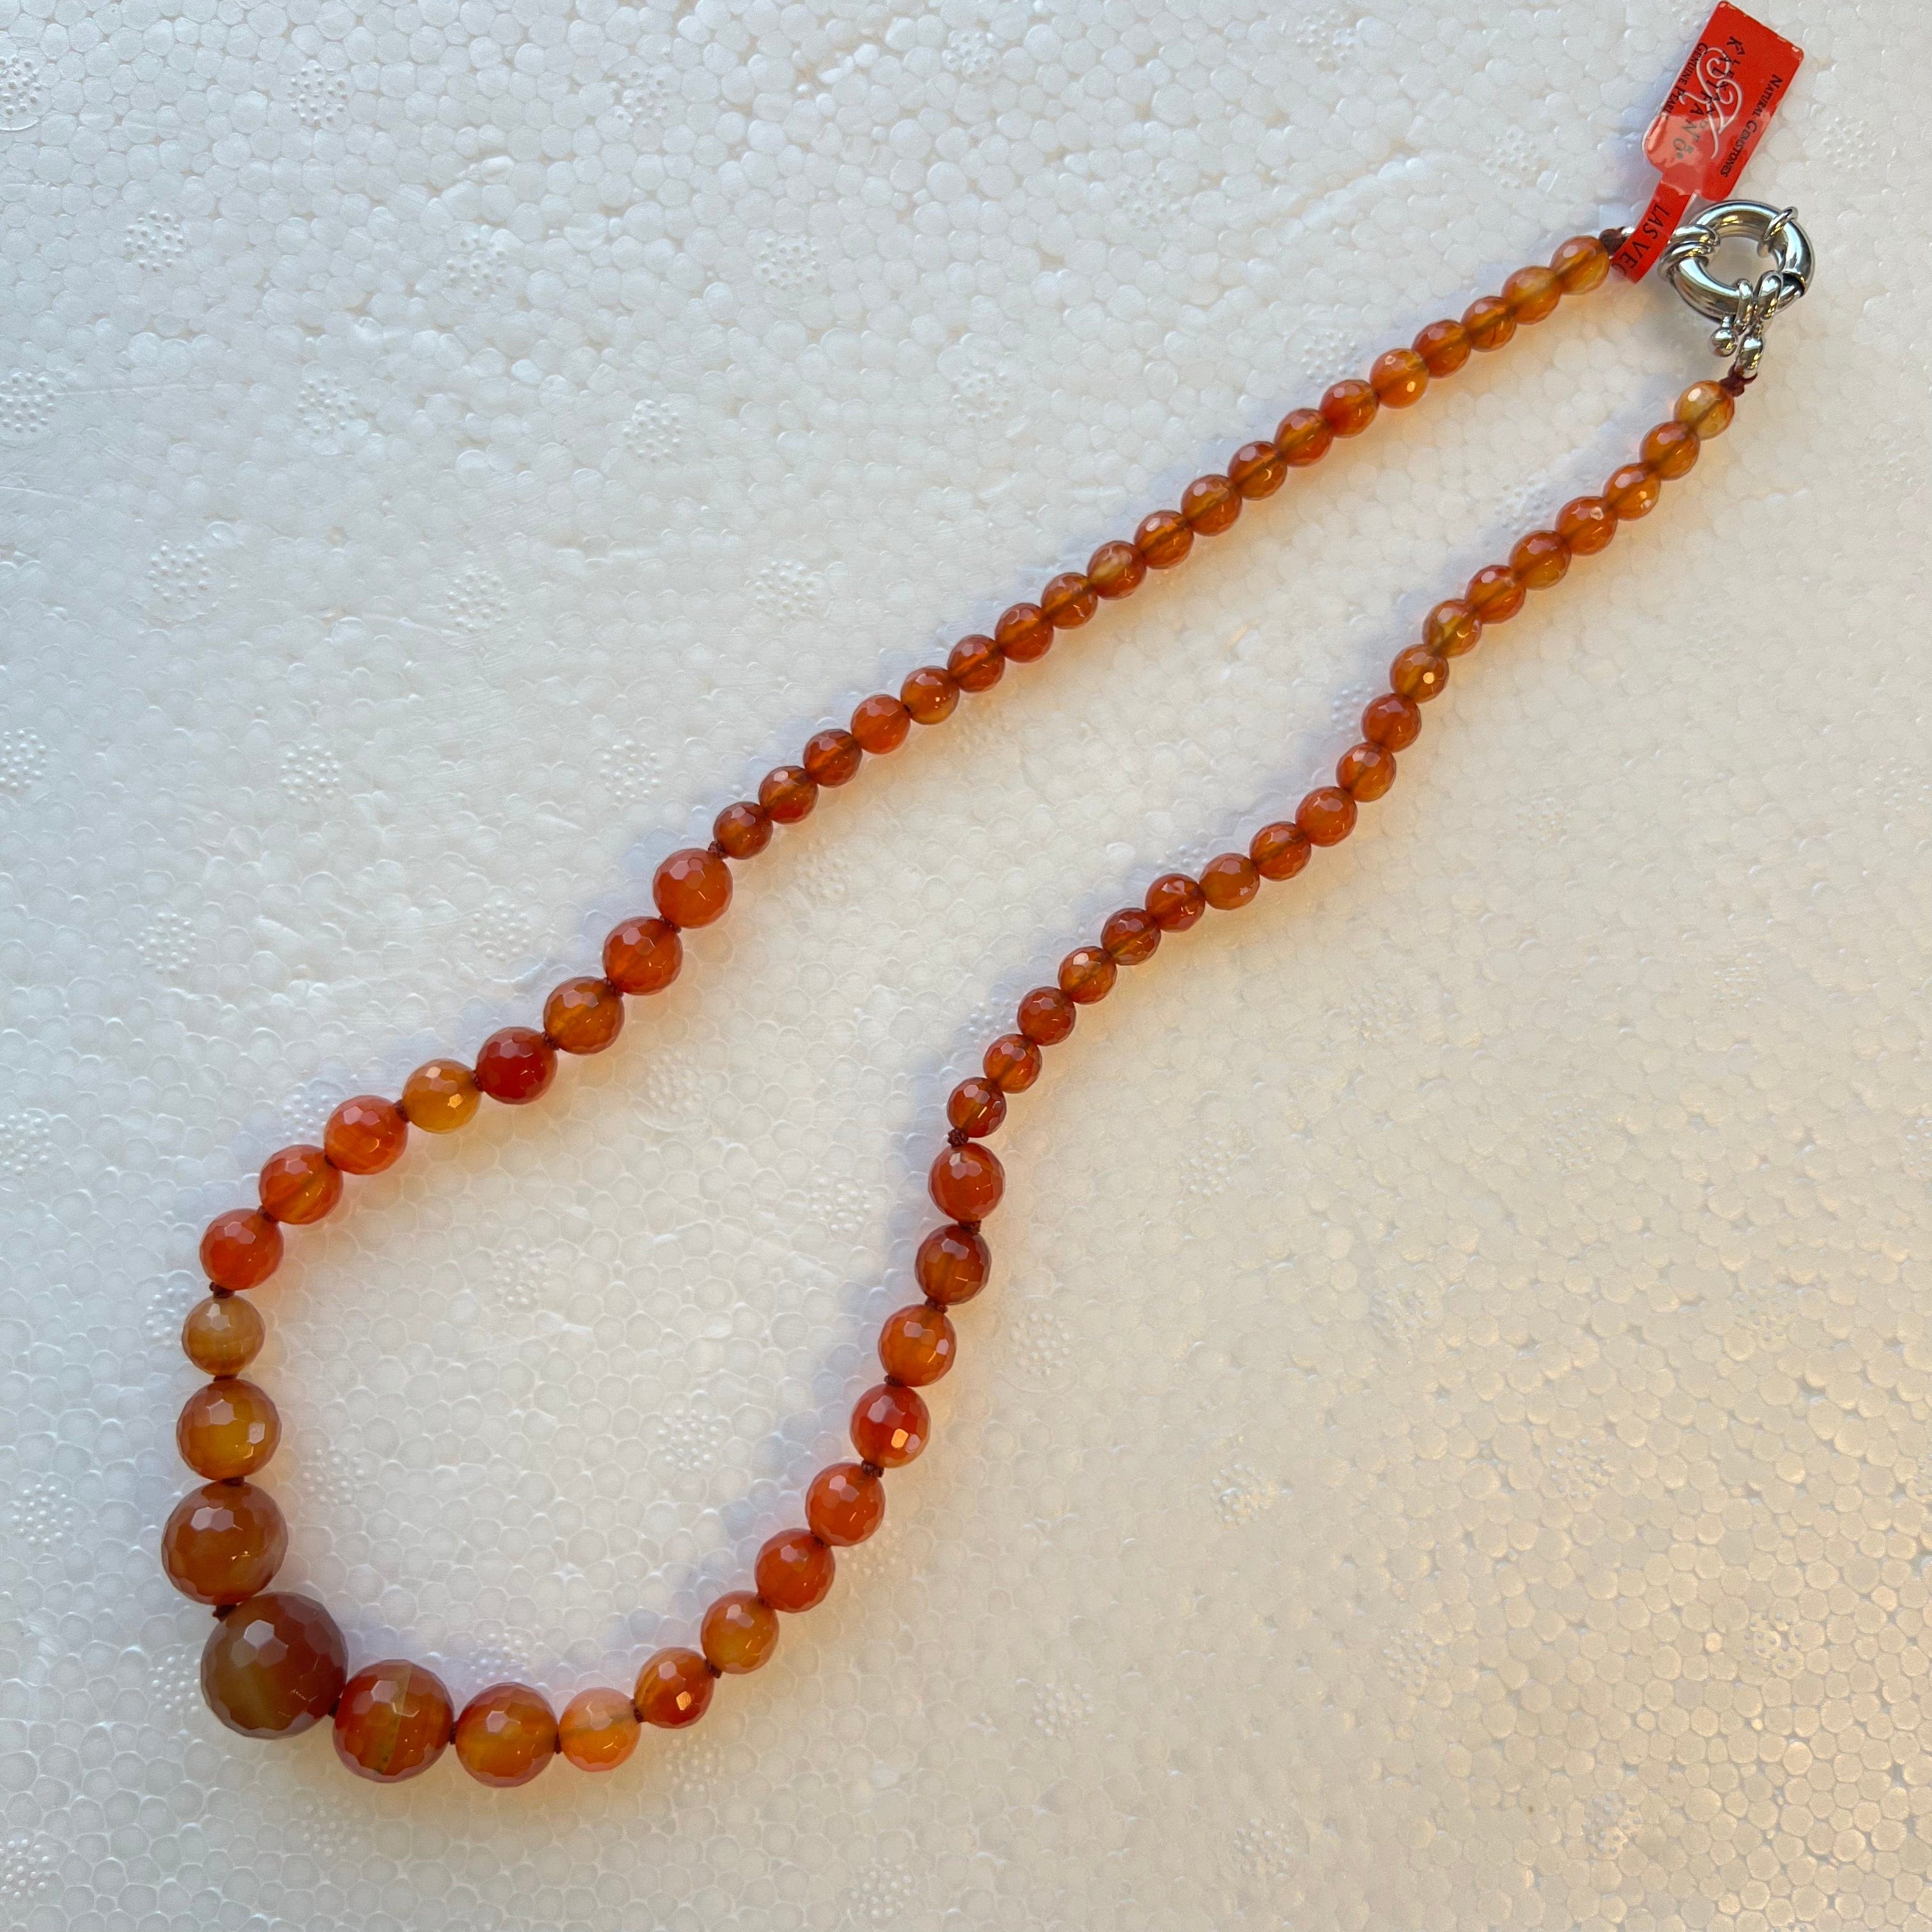 KALIFANO Gemstone Necklaces Faceted Carnelian Beads Gemstone Necklace RED-NGP-014